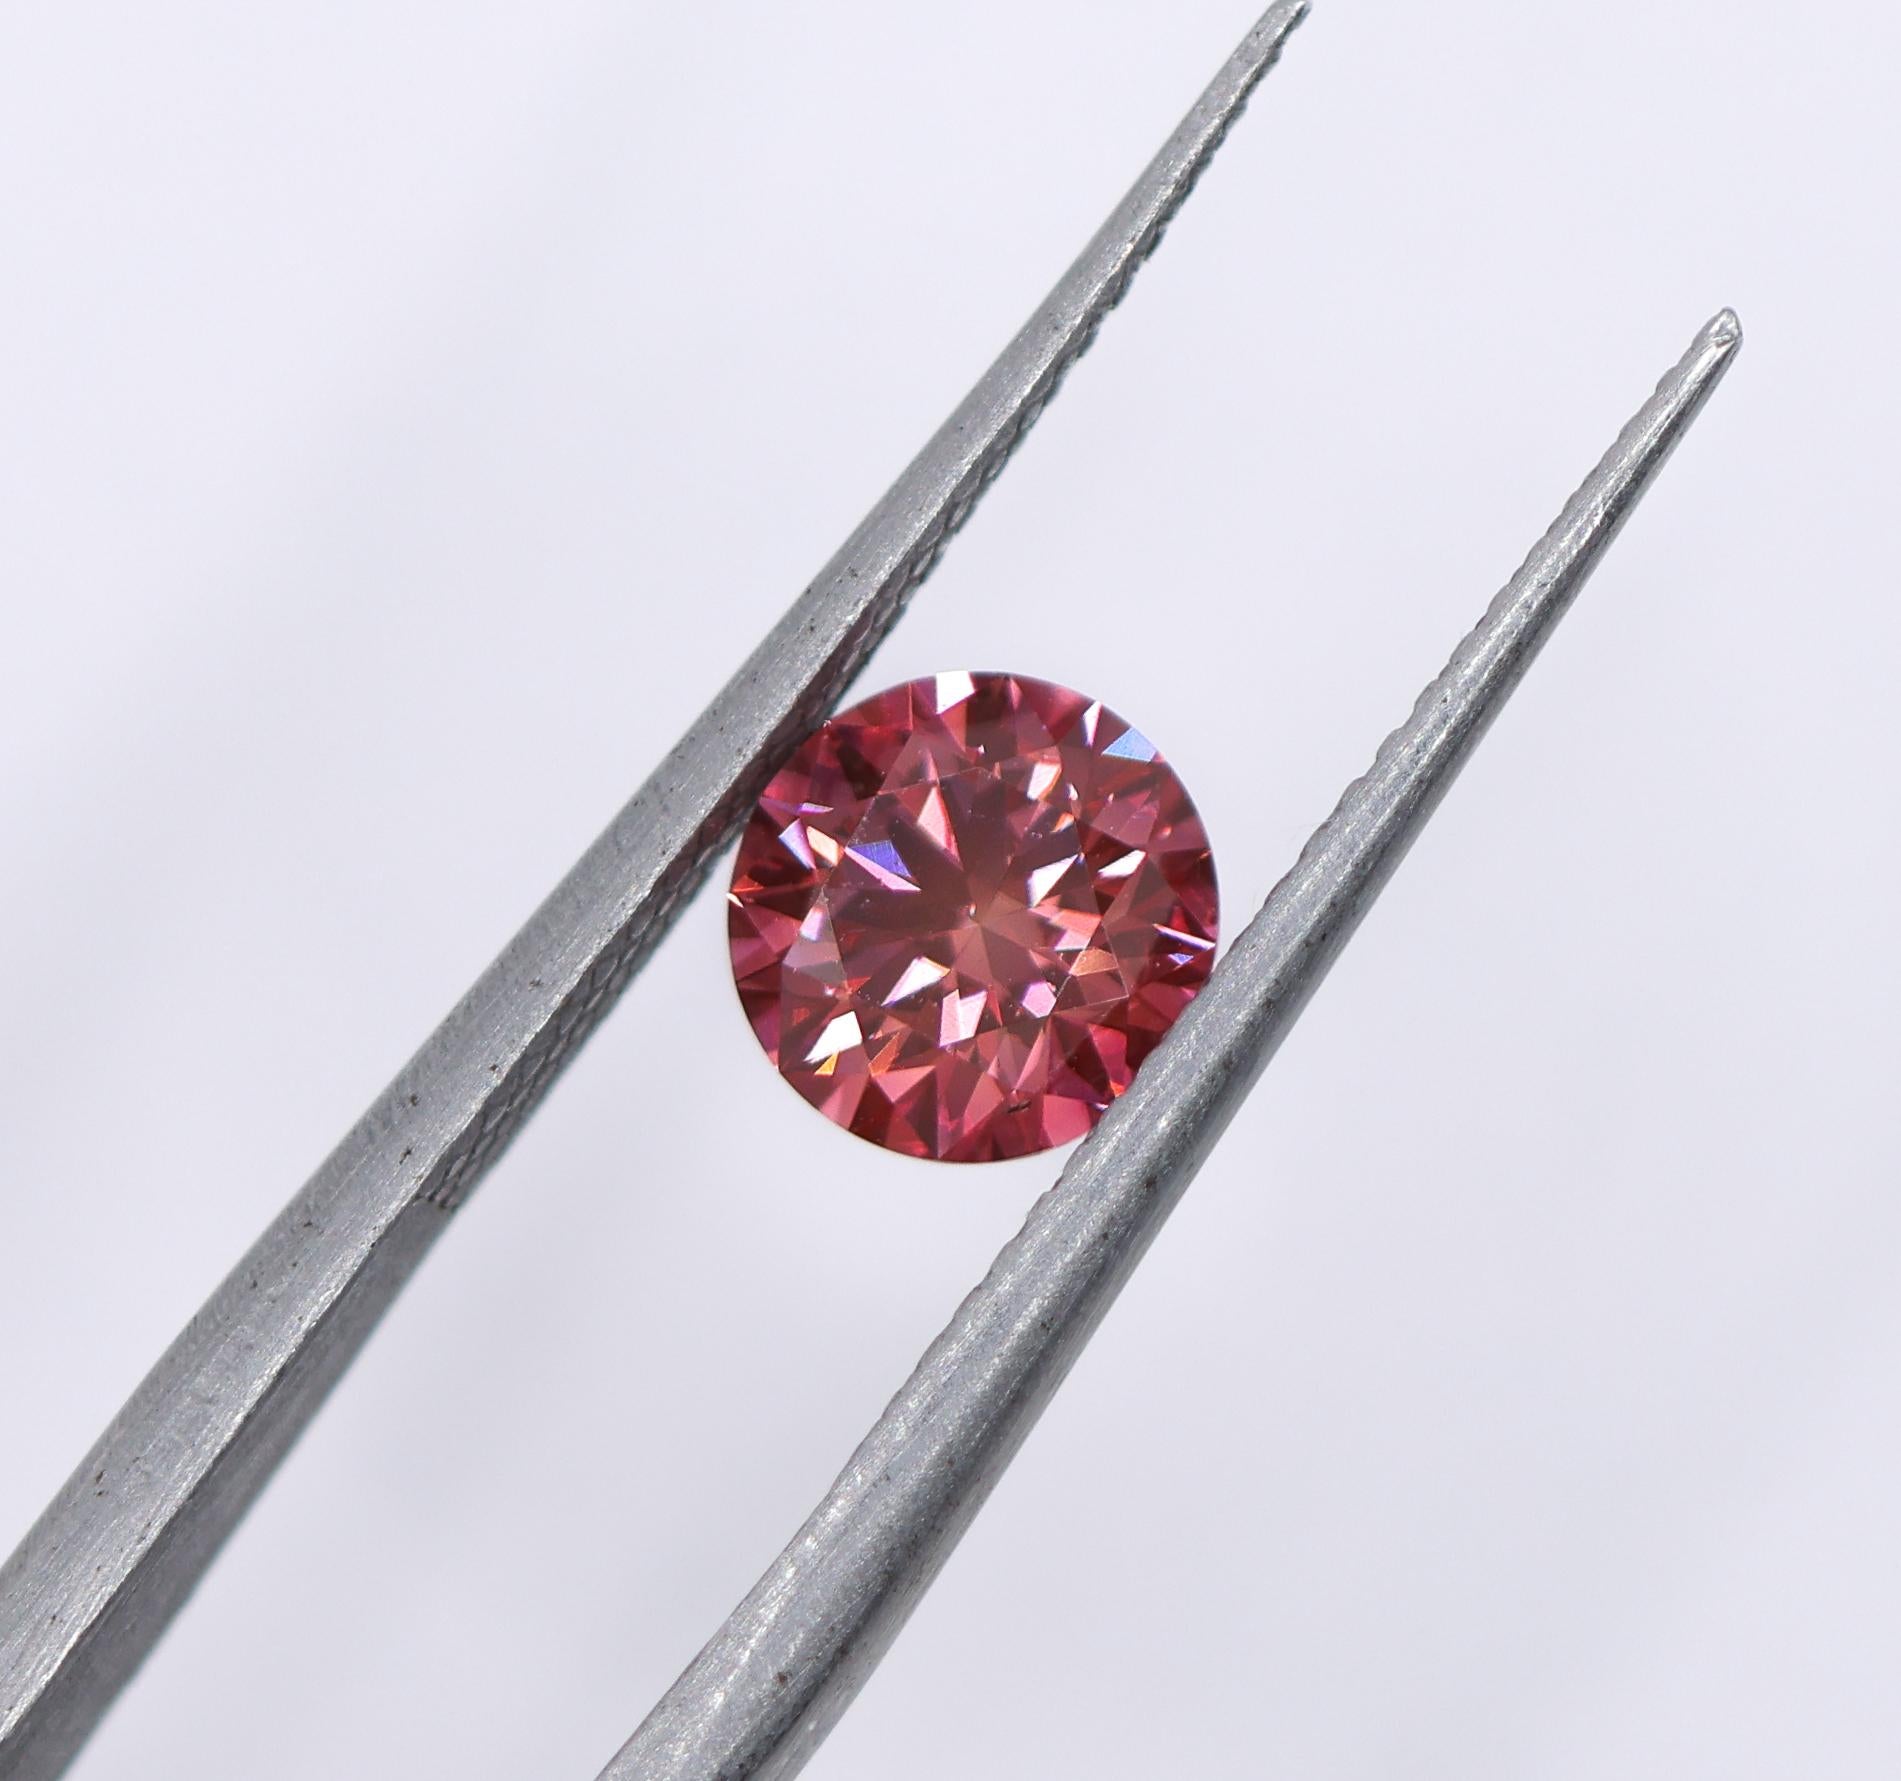 We are thrilled to bring you this absolutely gorgeous pink natural earth mined diamond! This diamond is HPHT treated, giving it a stunning Fancy Deep Pink color. A fabulous size for an engagement ring or statement piece that is sure to turn heads.